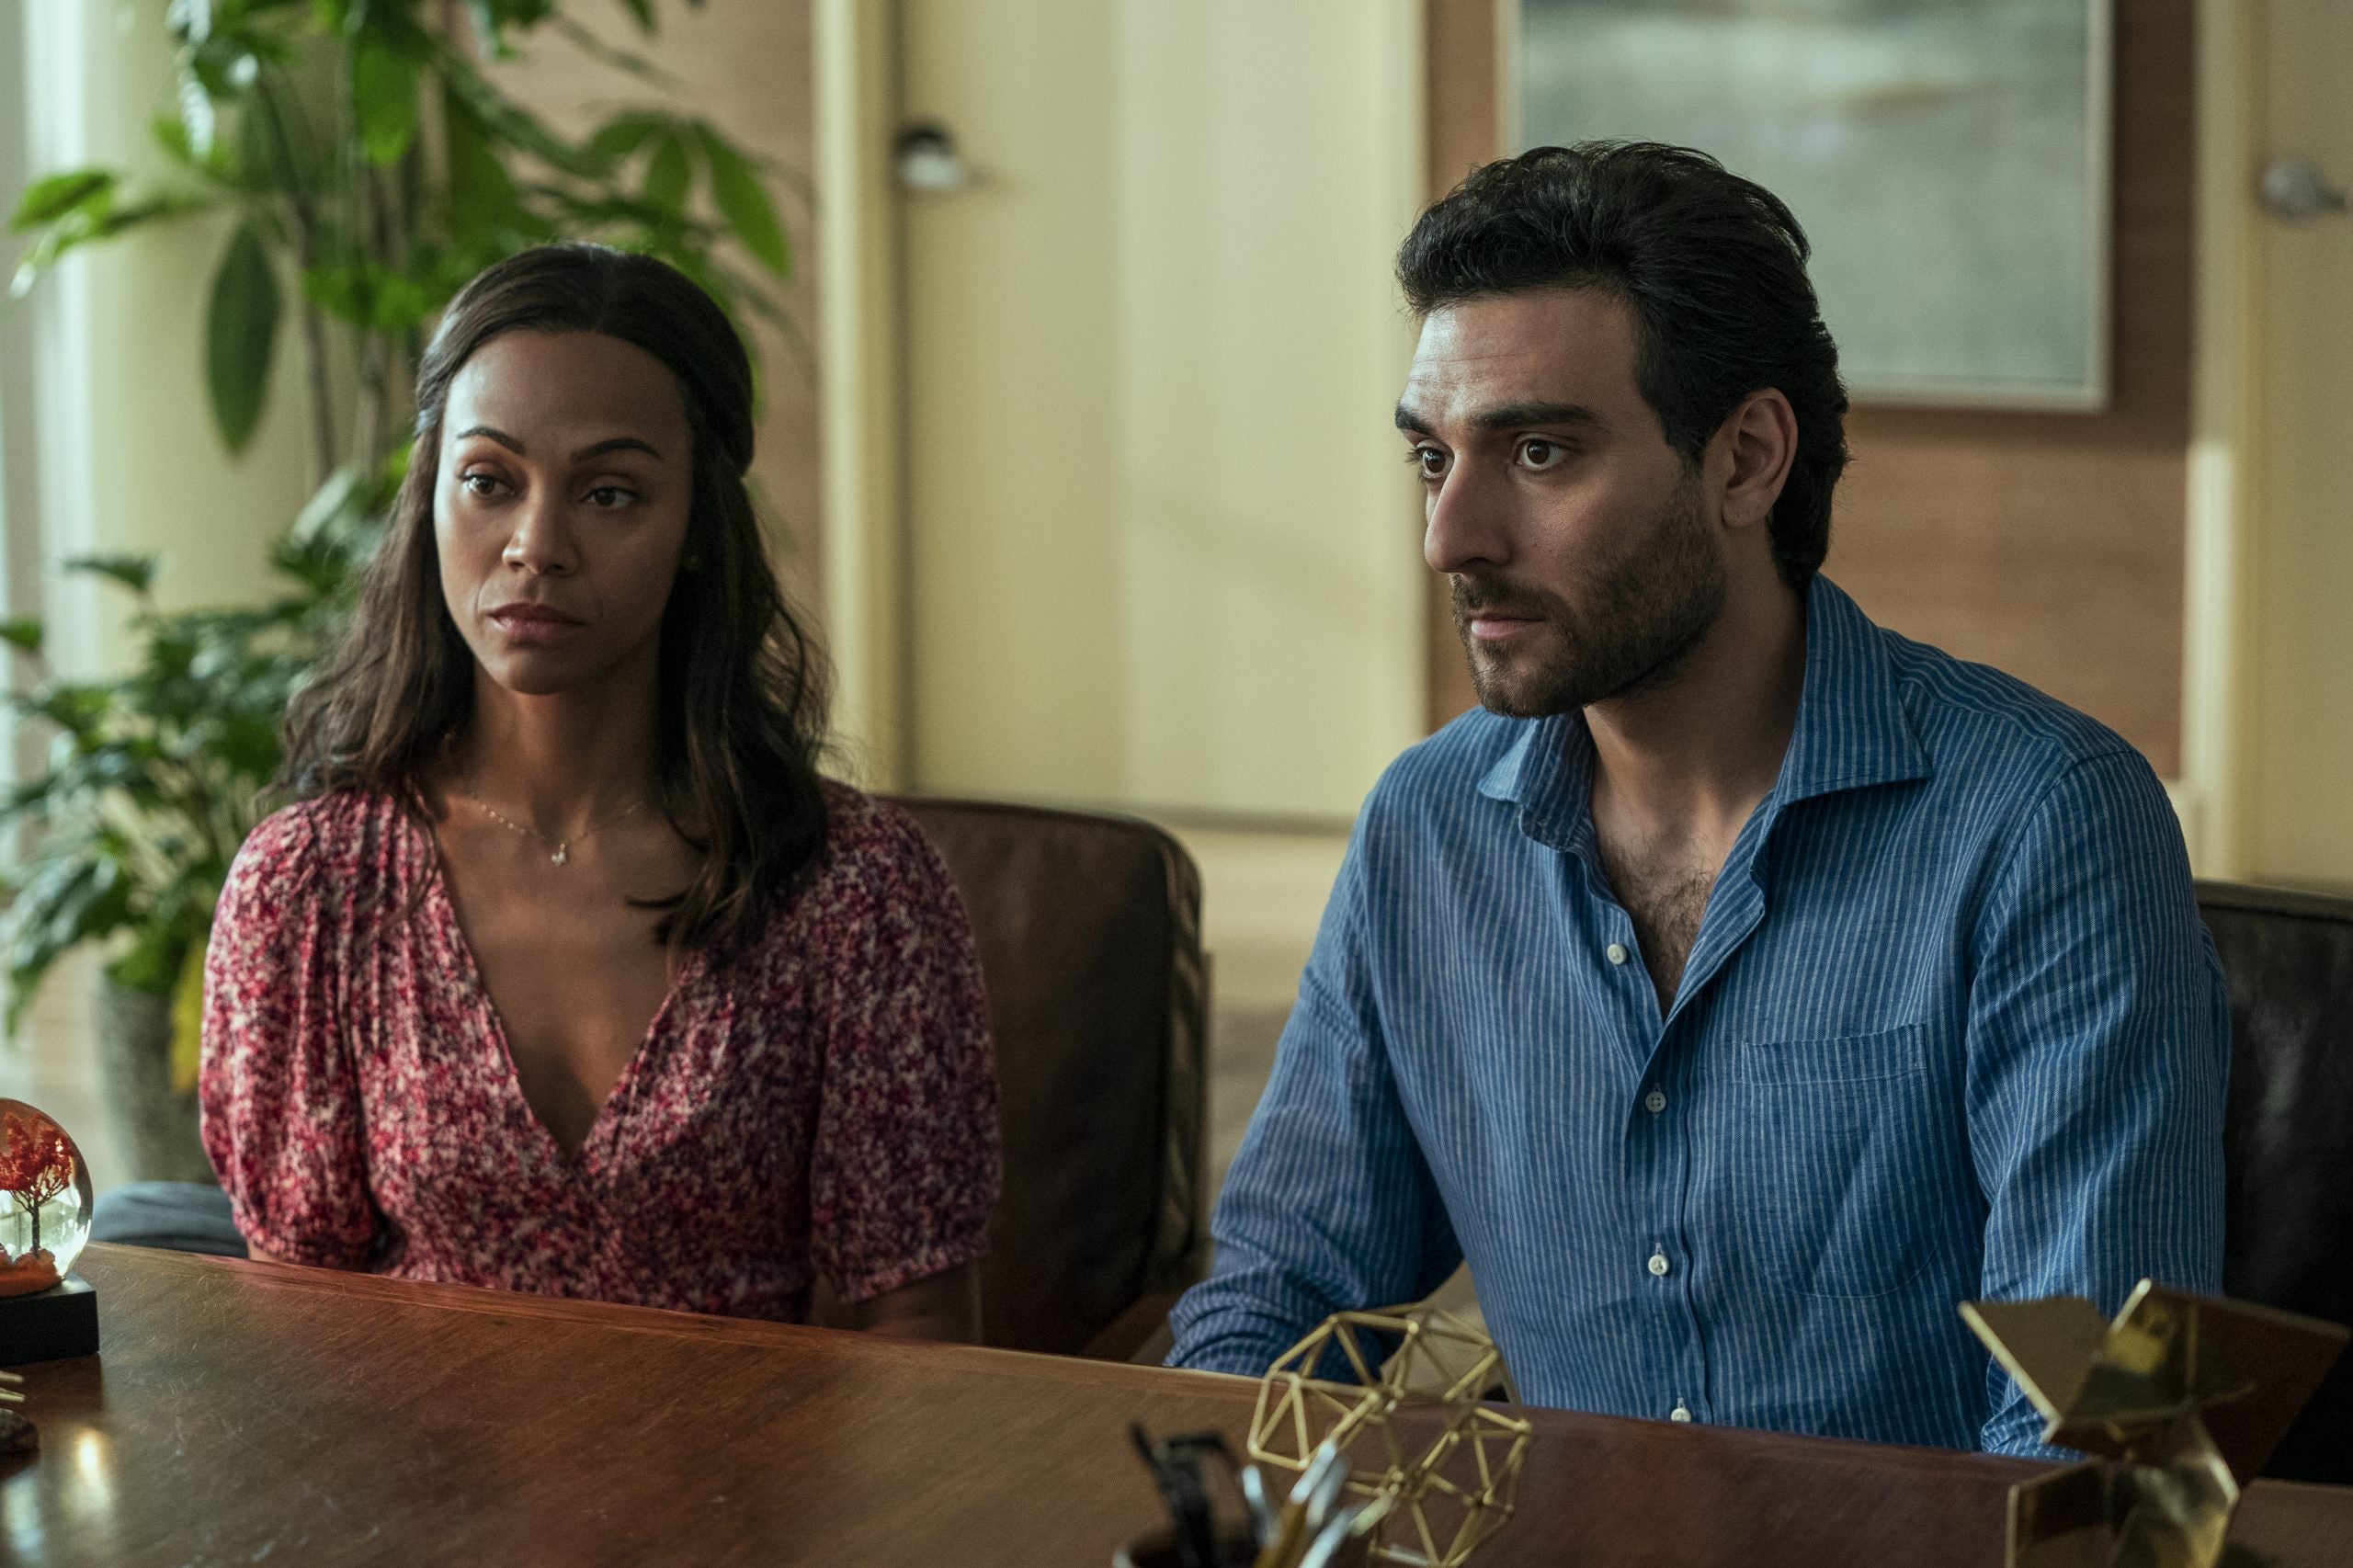 ‘From Scratch:’ Netflix’s Adapted Series Romanticizes Borderless Love, Family Unity & Healing Through Loss